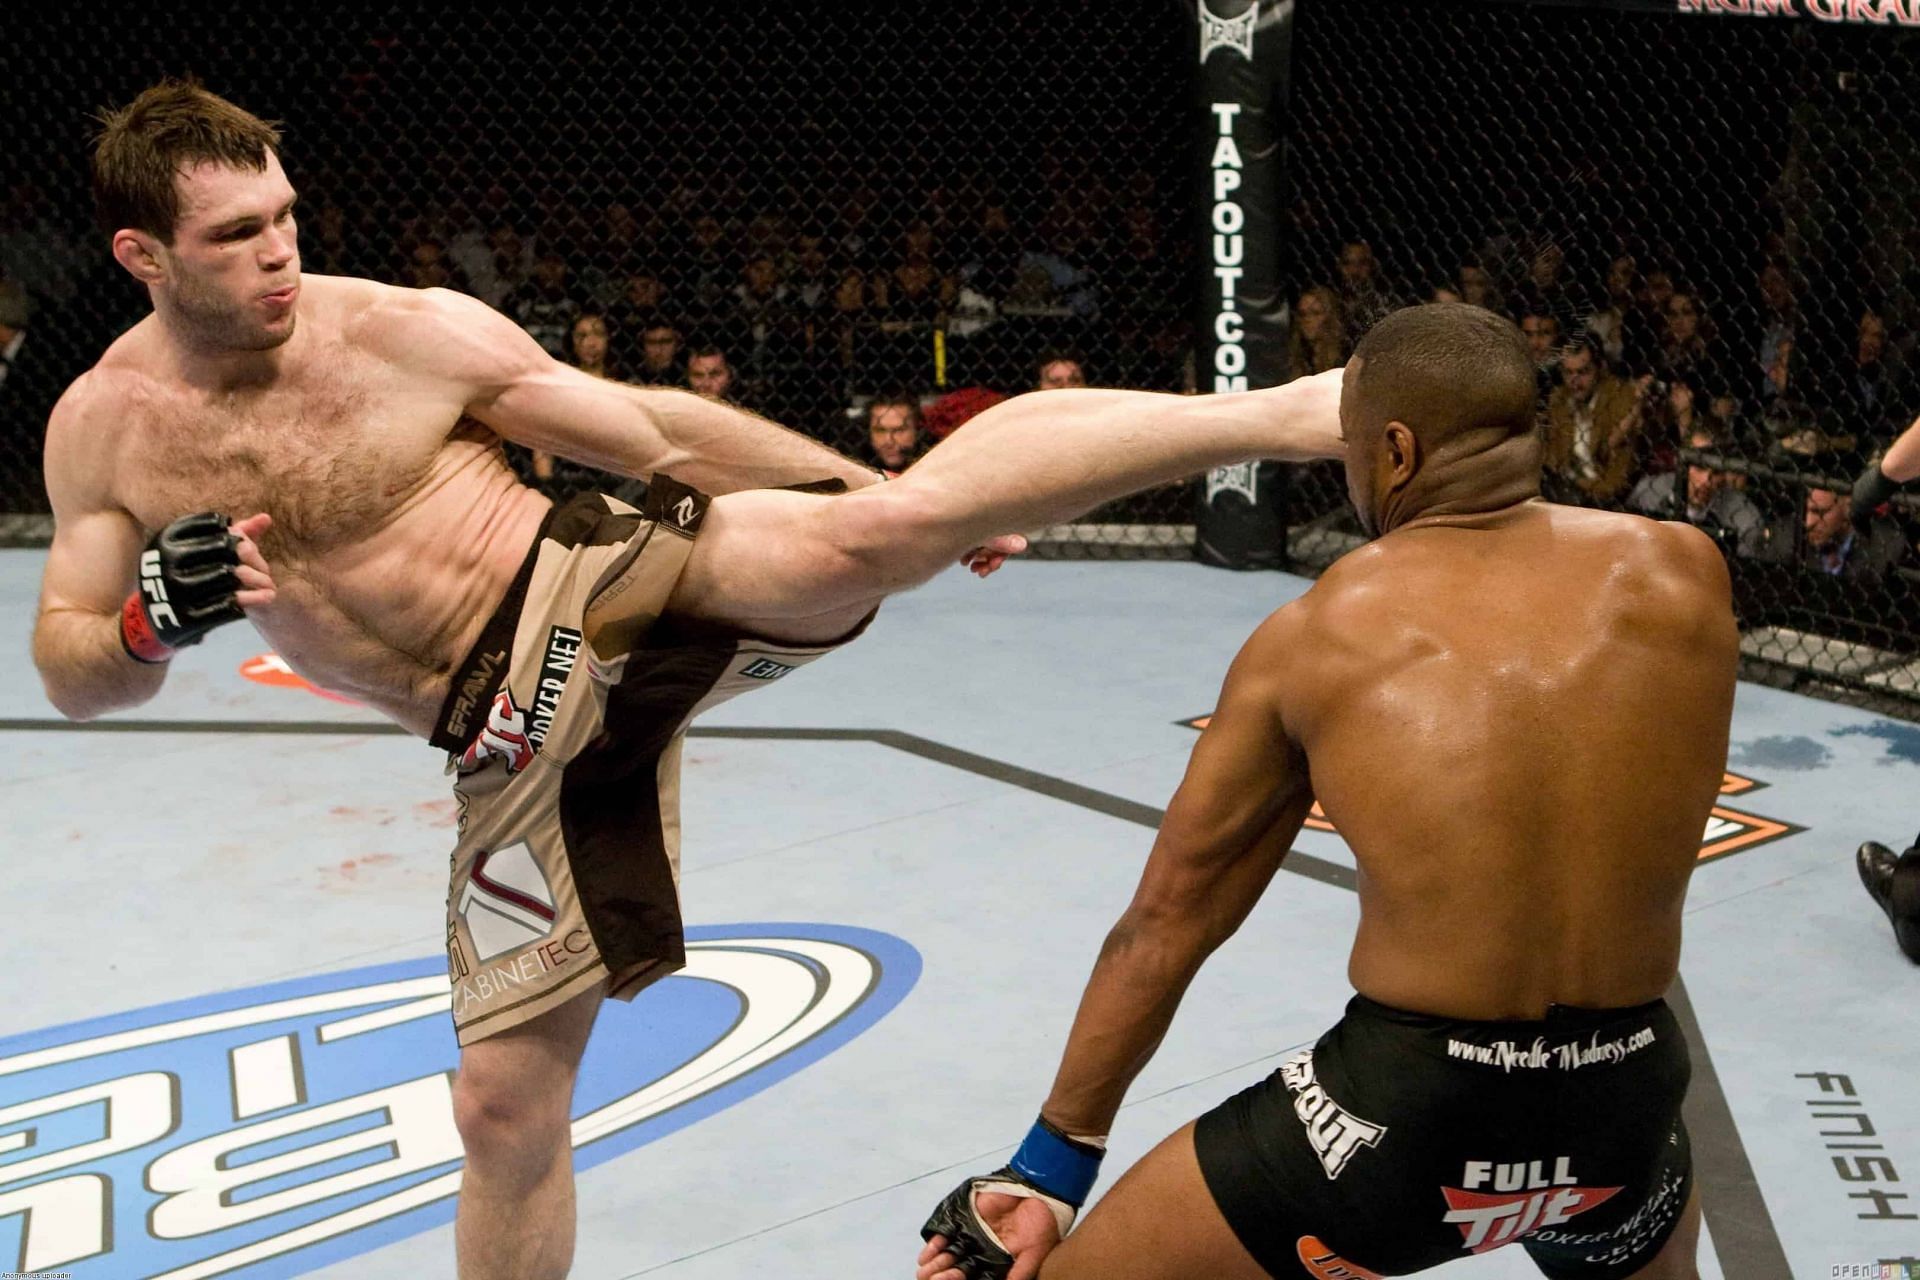 Forrest Griffin and Rashad Evans headlined an epic pay-per-view at UFC 92